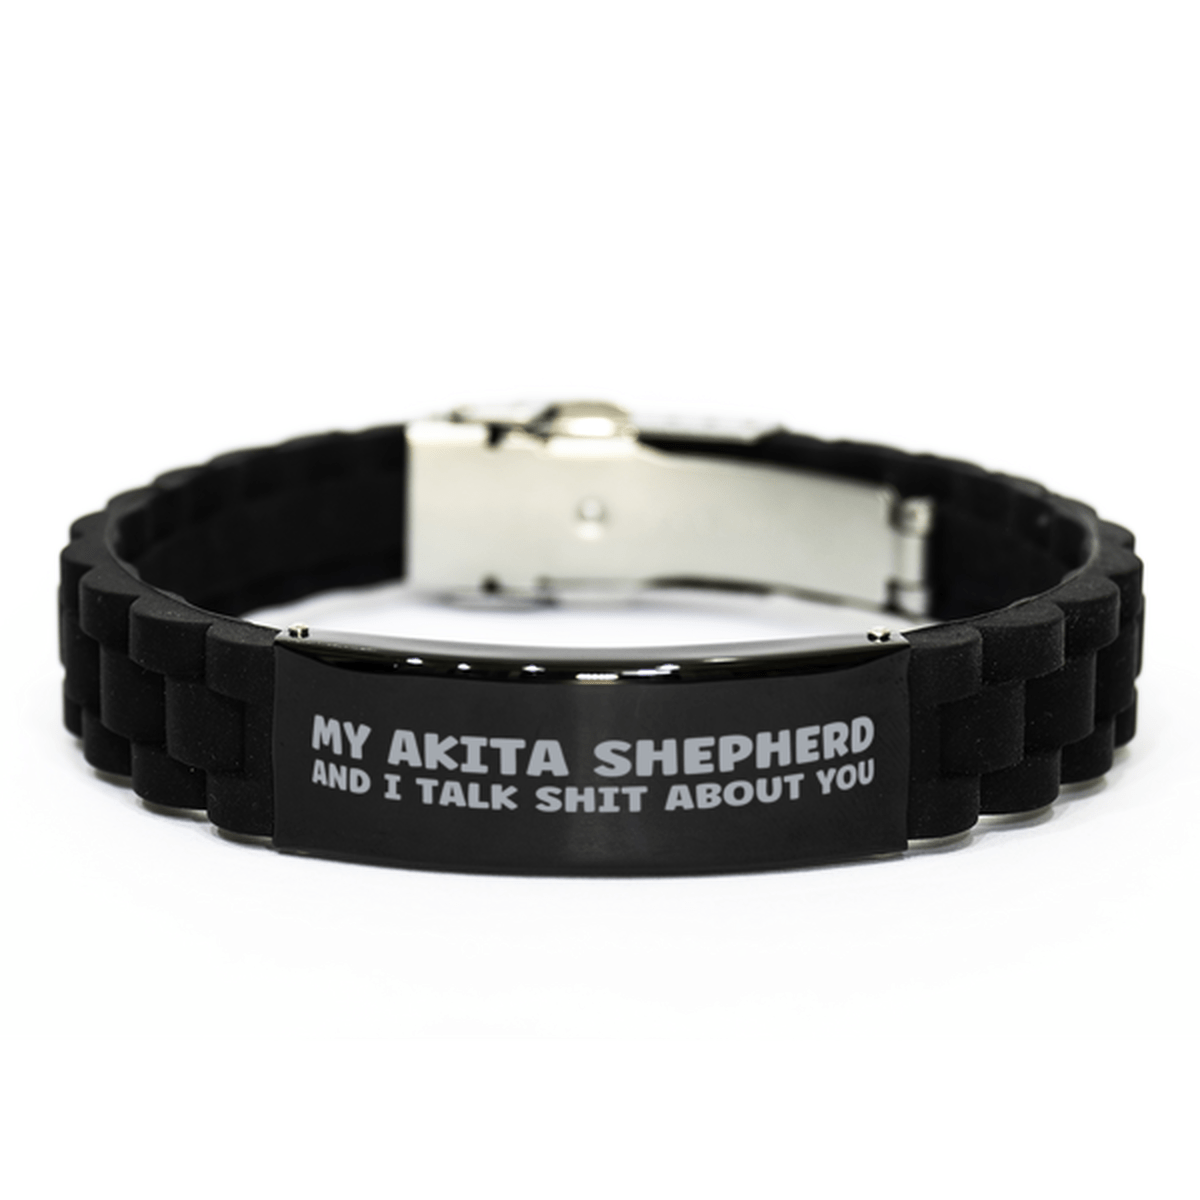 My Akita Shepherd and I Talk Shit About You, Funny Dog Owner Bracelet